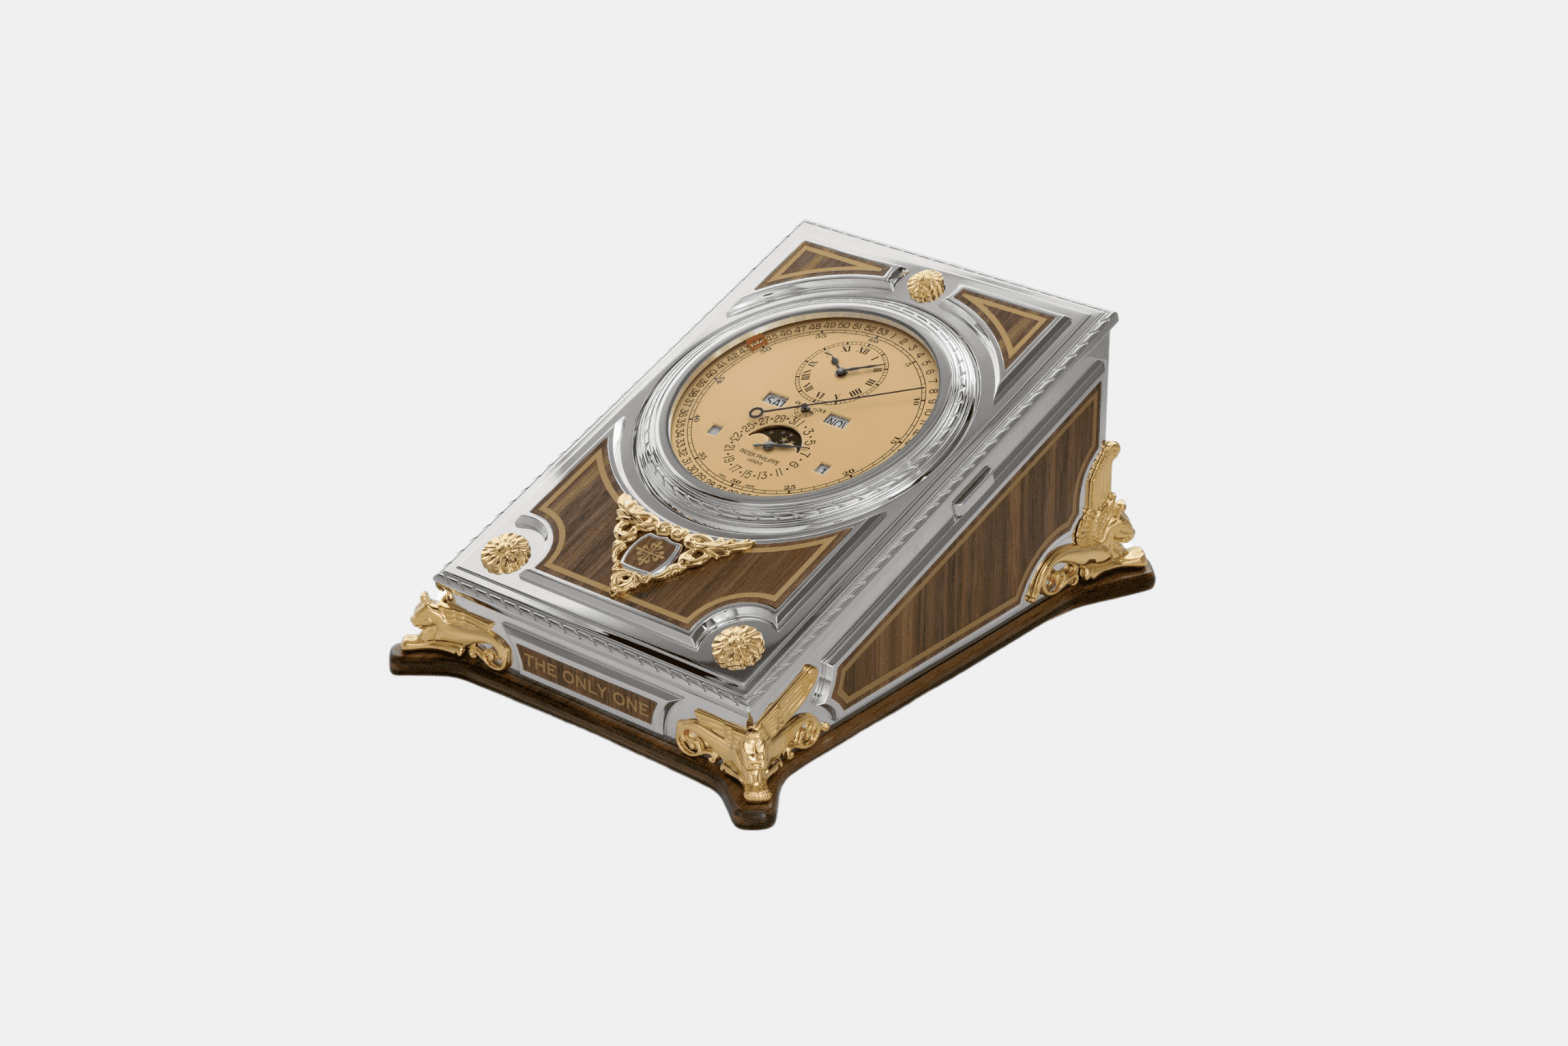 Patek Philippe's entry into the 2021 Only Watch Image Desk Clock